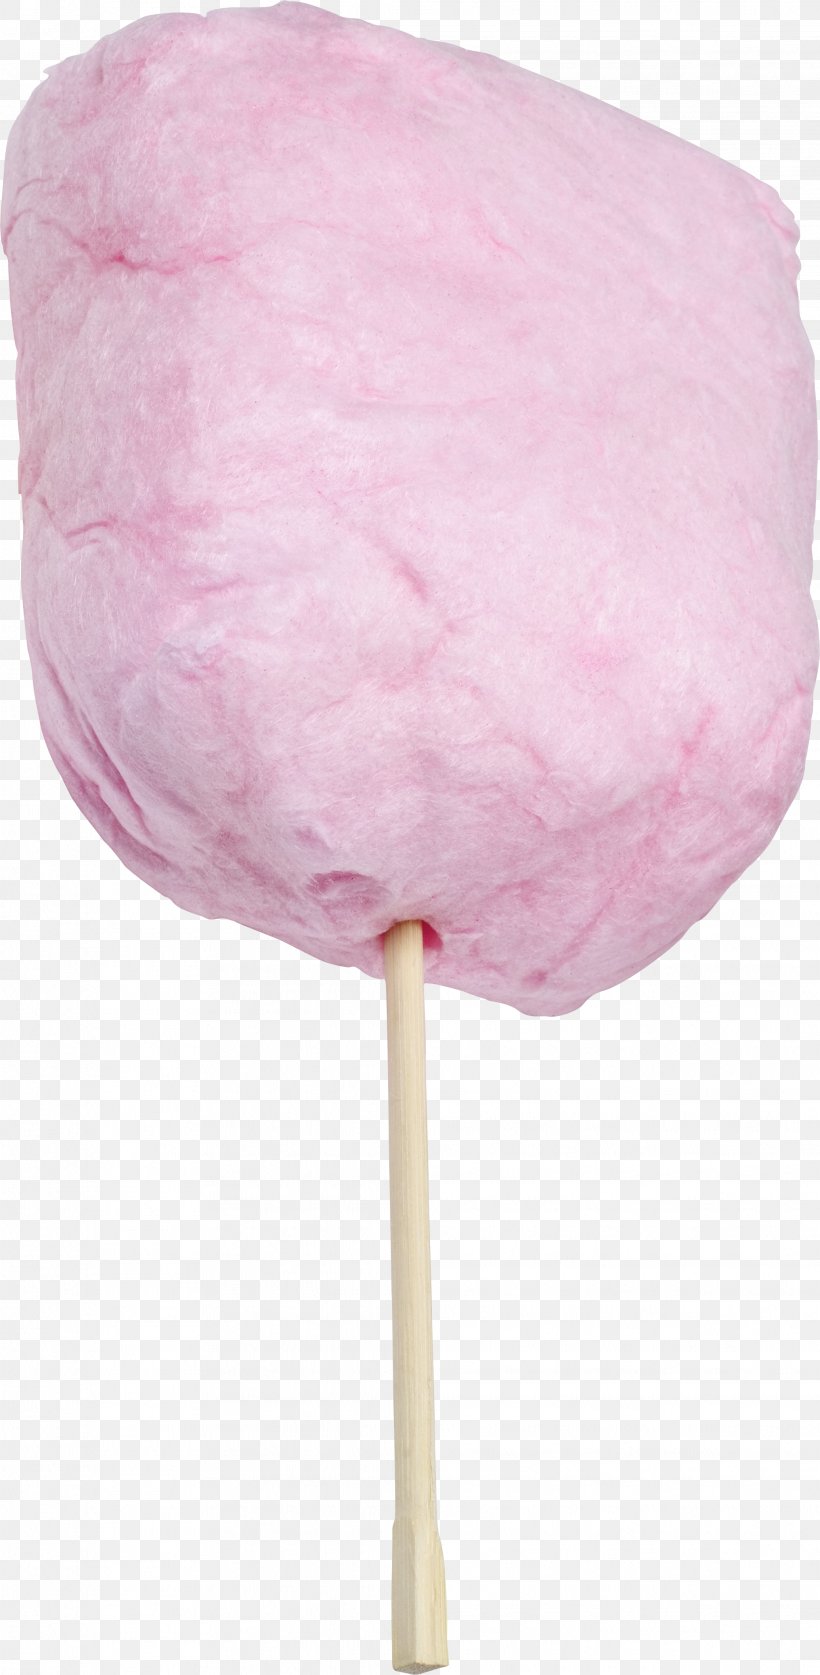 Cotton Candy Food Sugar Sweetness, PNG, 2069x4227px, Cotton Candy, Candy, Cotton, Flavor, Food Download Free